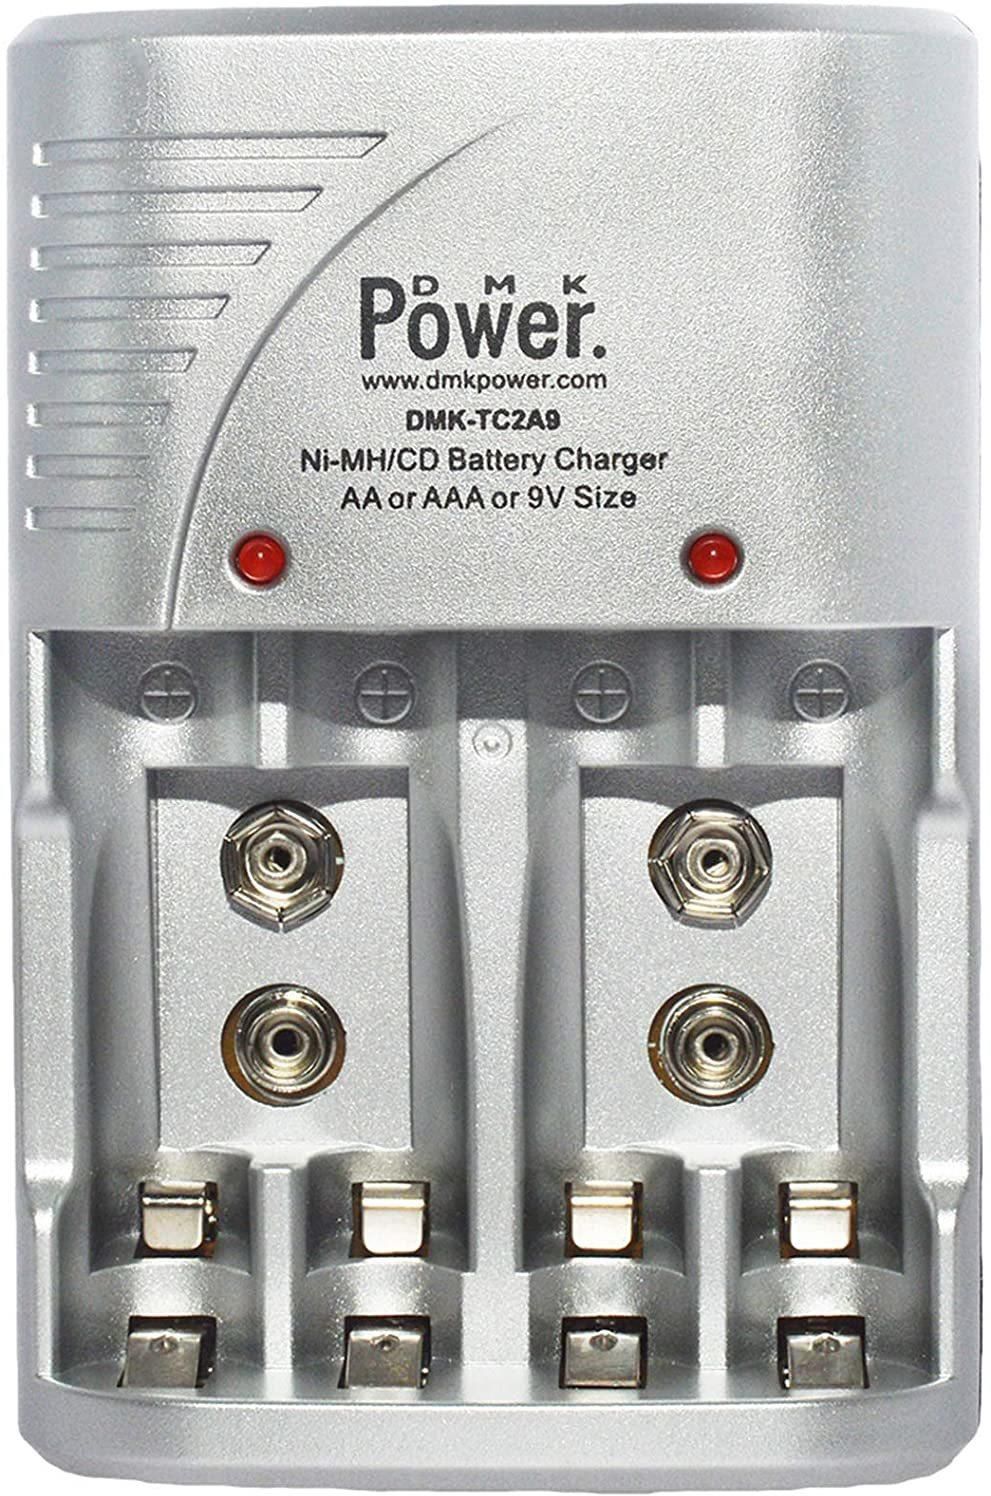 DMK-TC2A9 4 Slots Smart Rechargeable Charger for AA AAA NiCd 9V NiMh Batteries for House hold devices, toys, remote, flash light, radio, clock